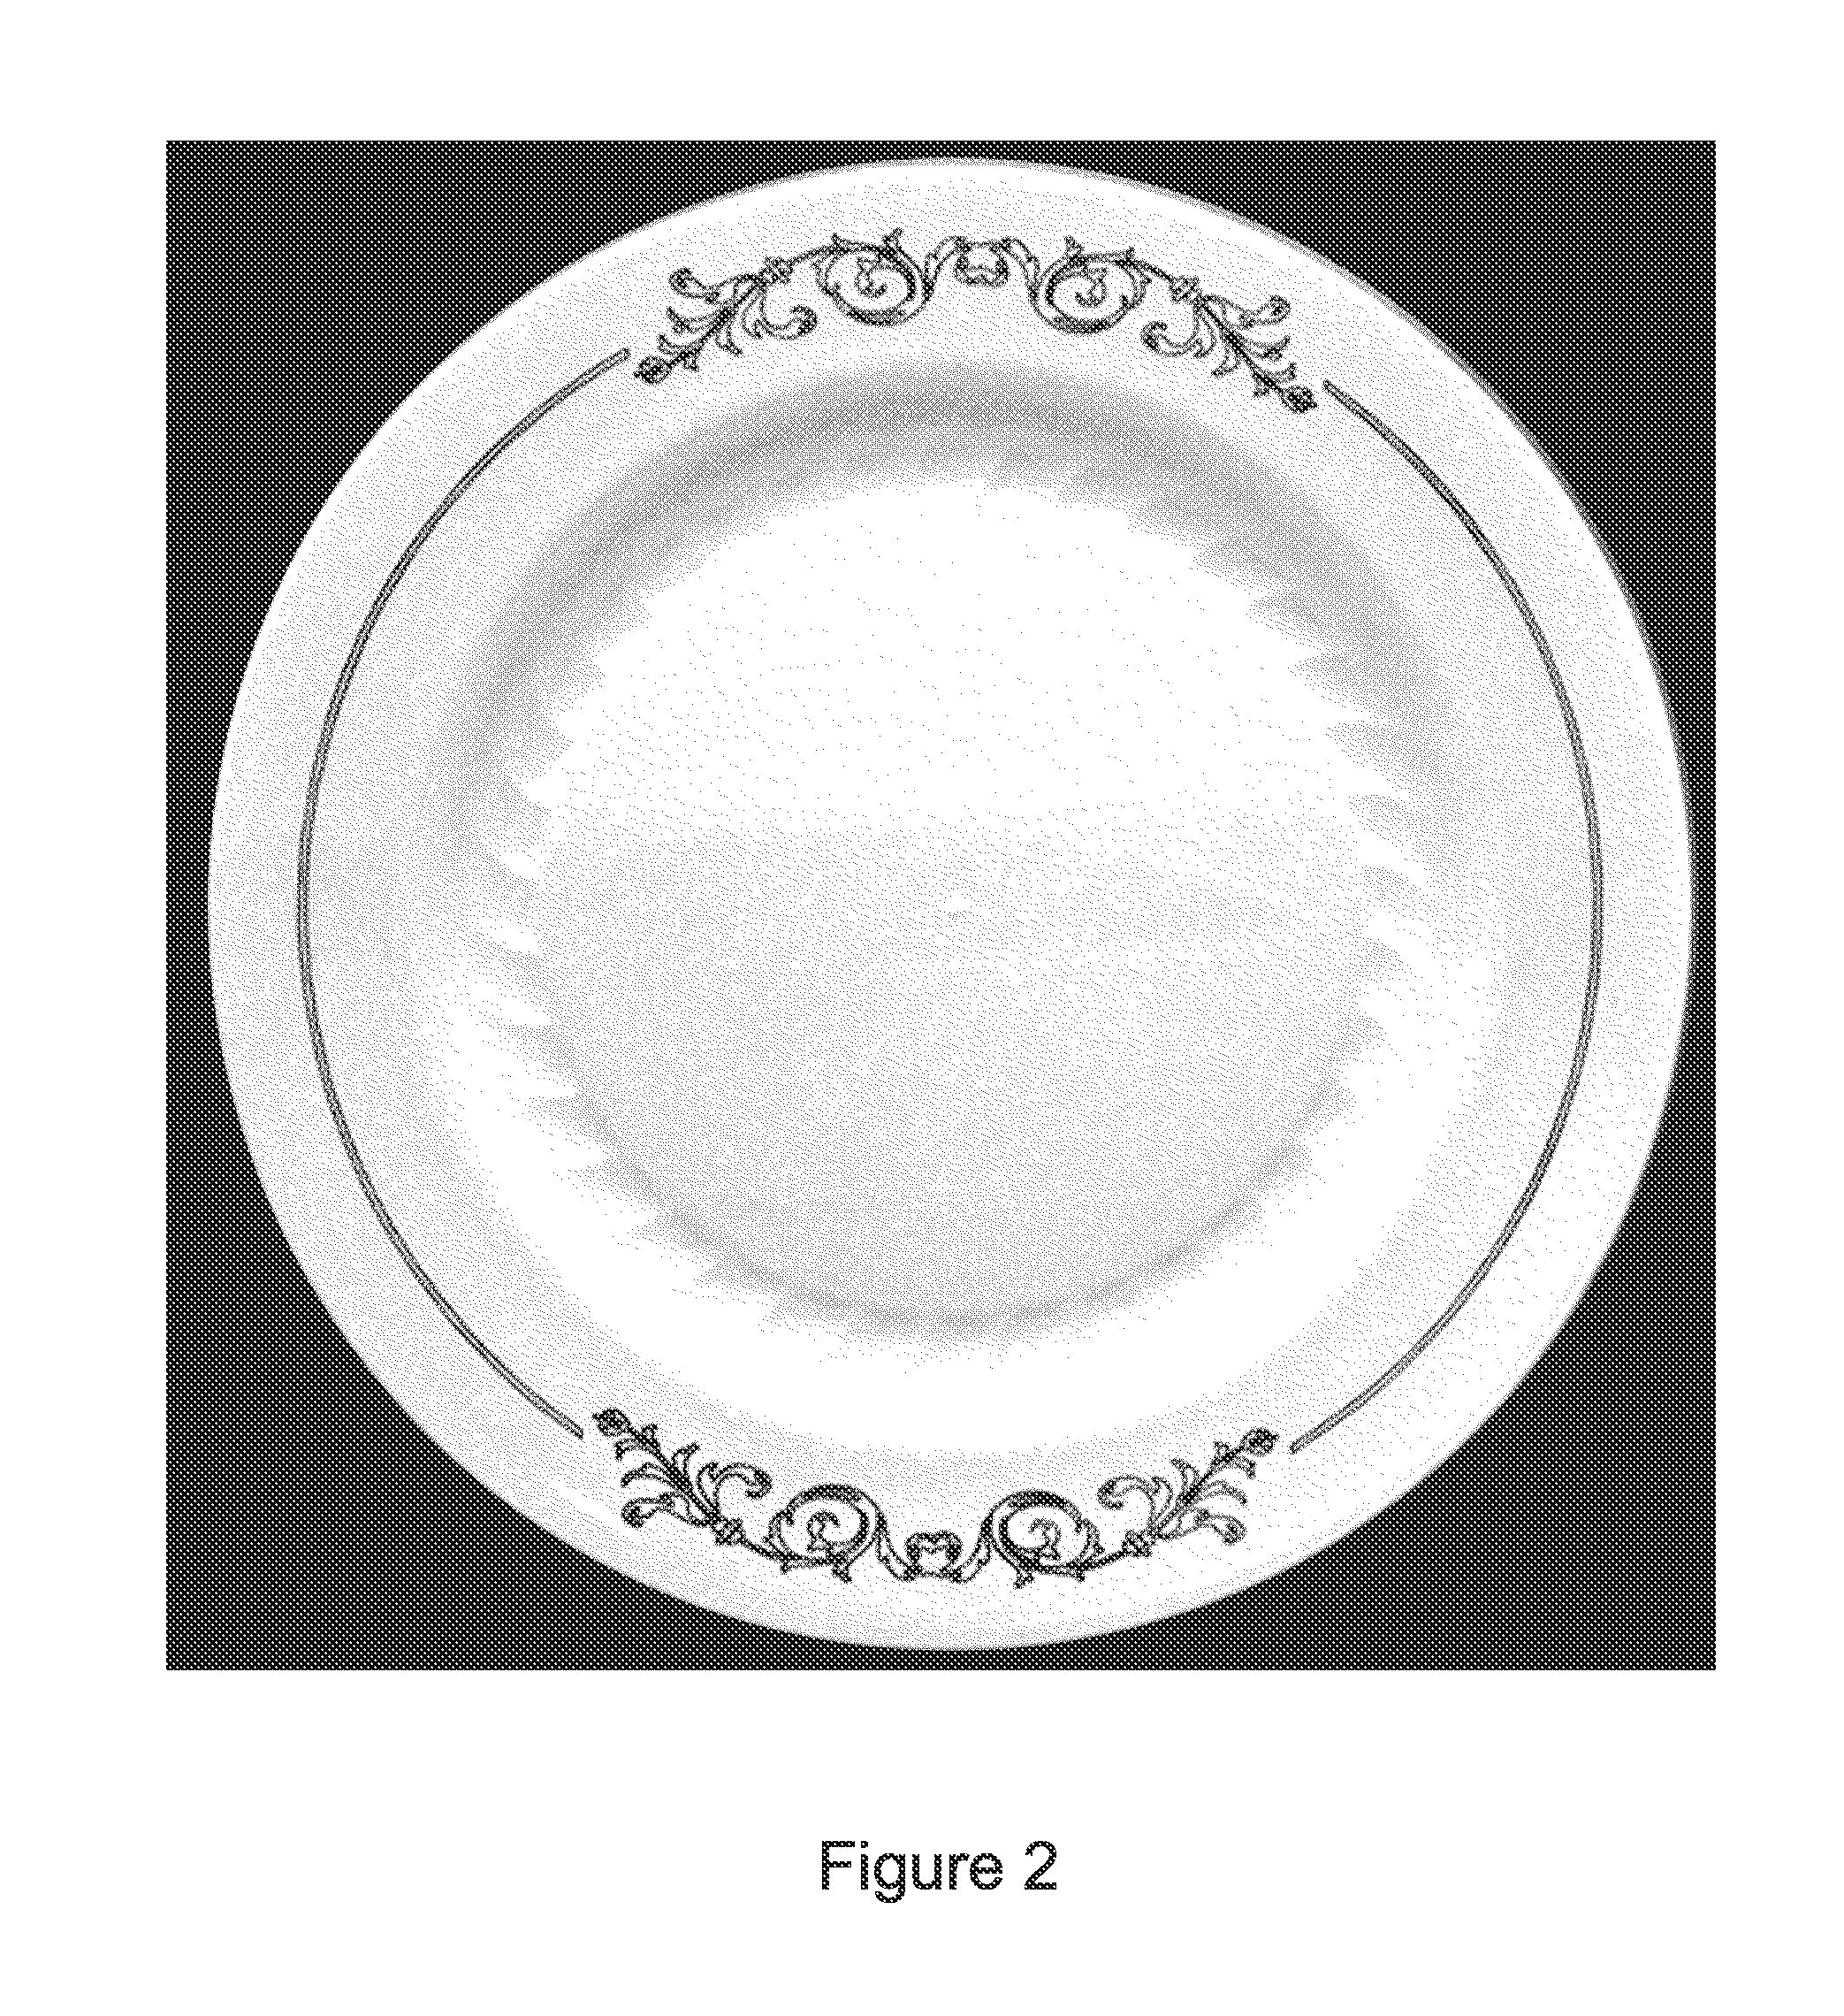 Food service articles bearing decorative markings, images, and/or custom content and method therefor